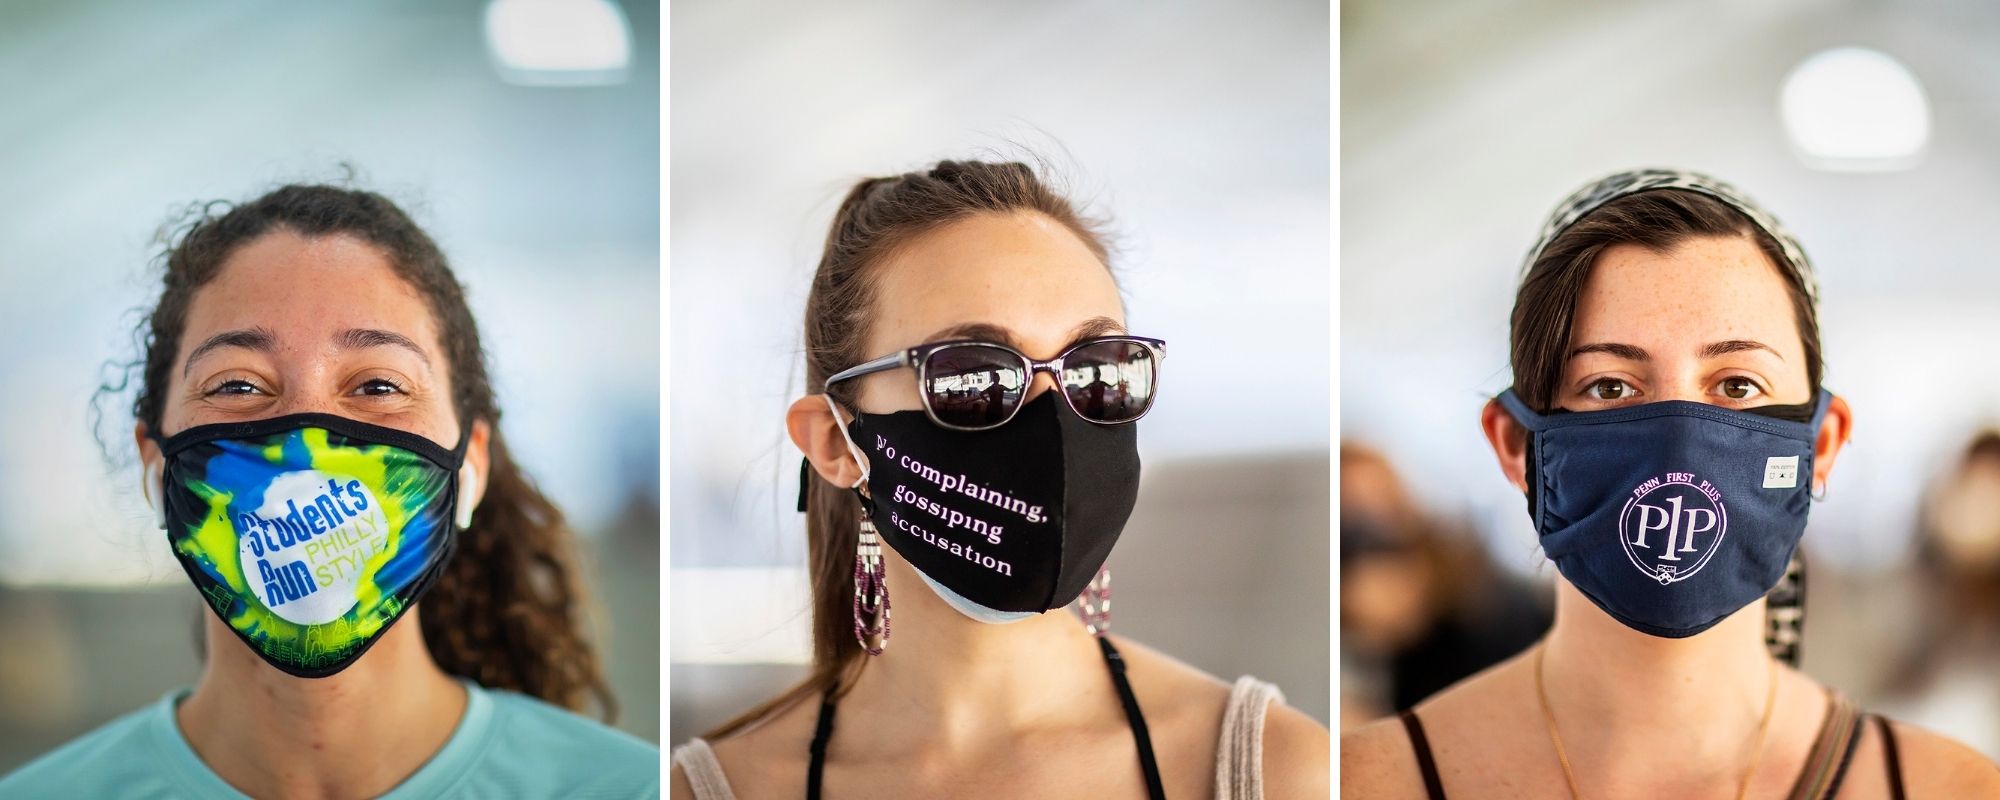 Three people on Penn’s campus wearing masks with logos and words.